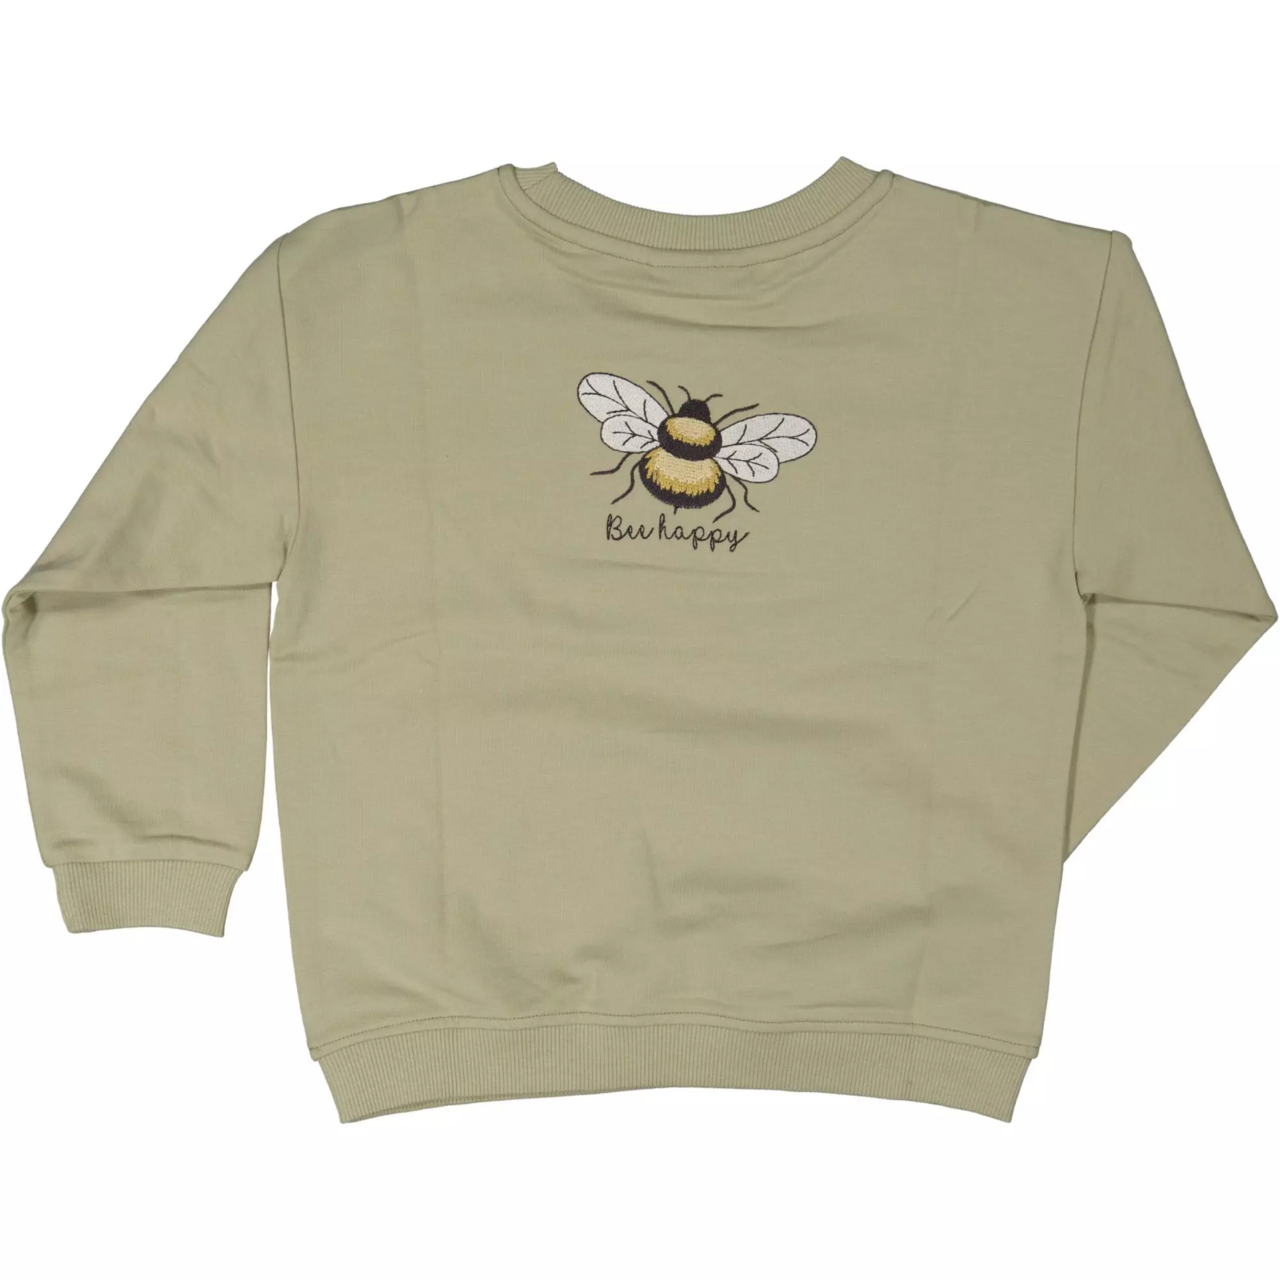 College sweater Olive 110/116